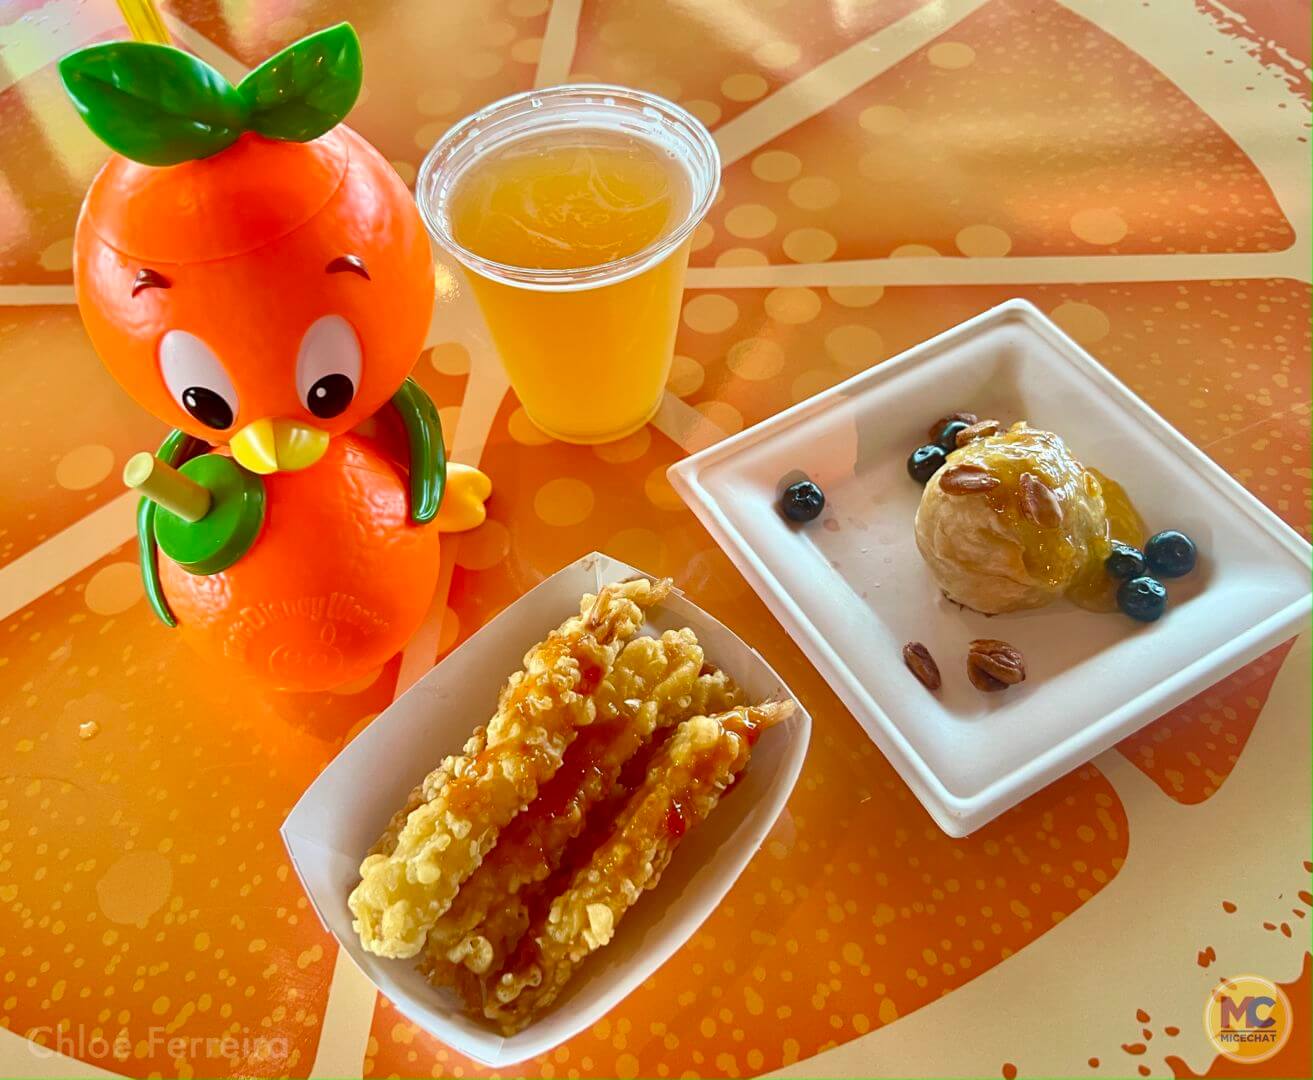 New Mugs and Tumblers Featuring Mickey & Minnie, Woody, Buzz Lightyear,  Disney Snacks, and More at the Disneyland Resort - WDW News Today